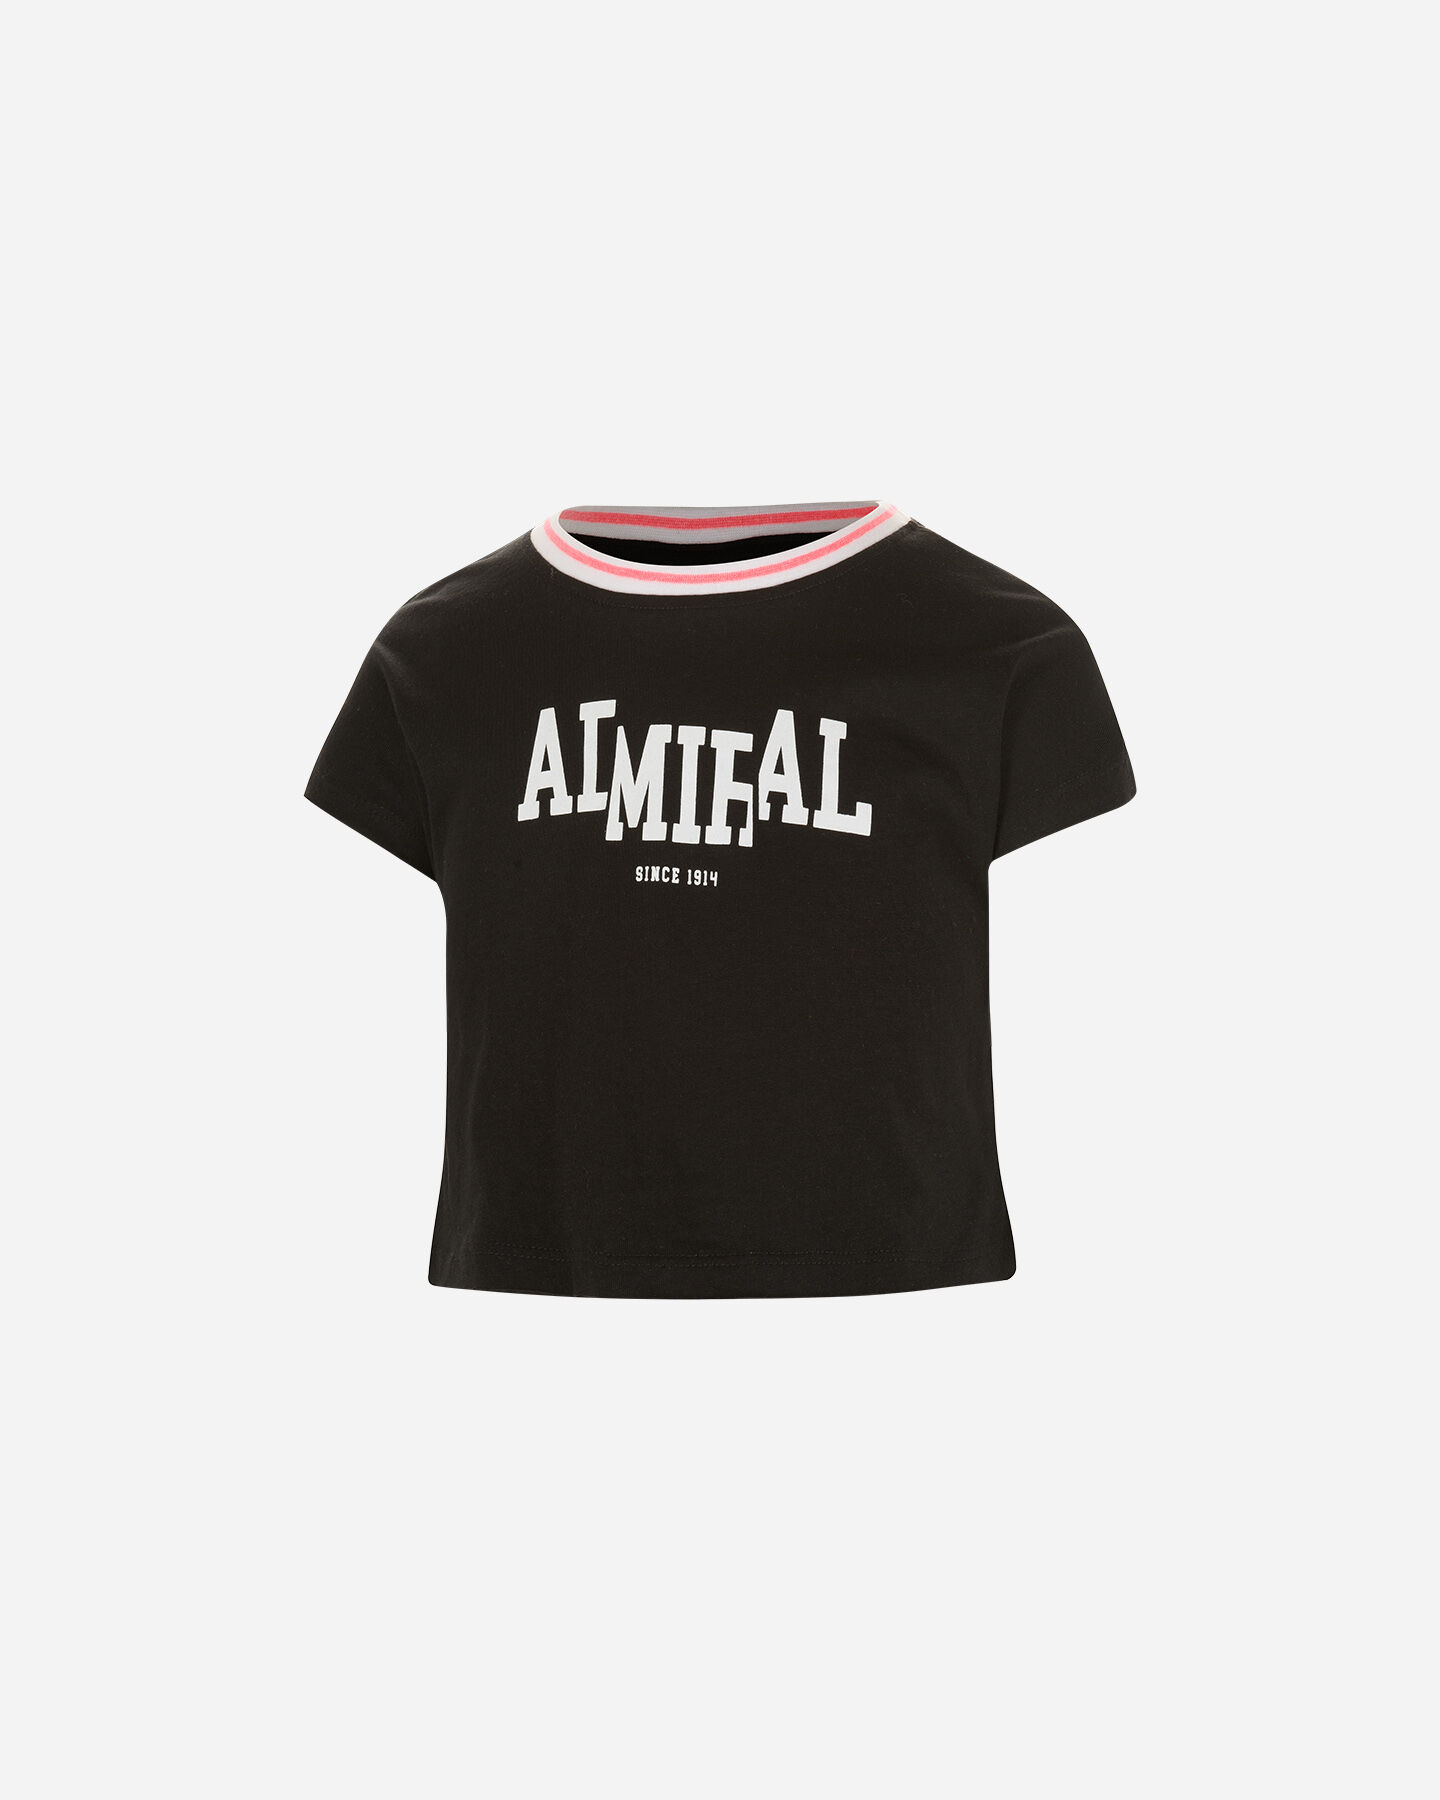  T-Shirt ADMIRAL BASIC SPORT JR S4101123|050|6A scatto 0